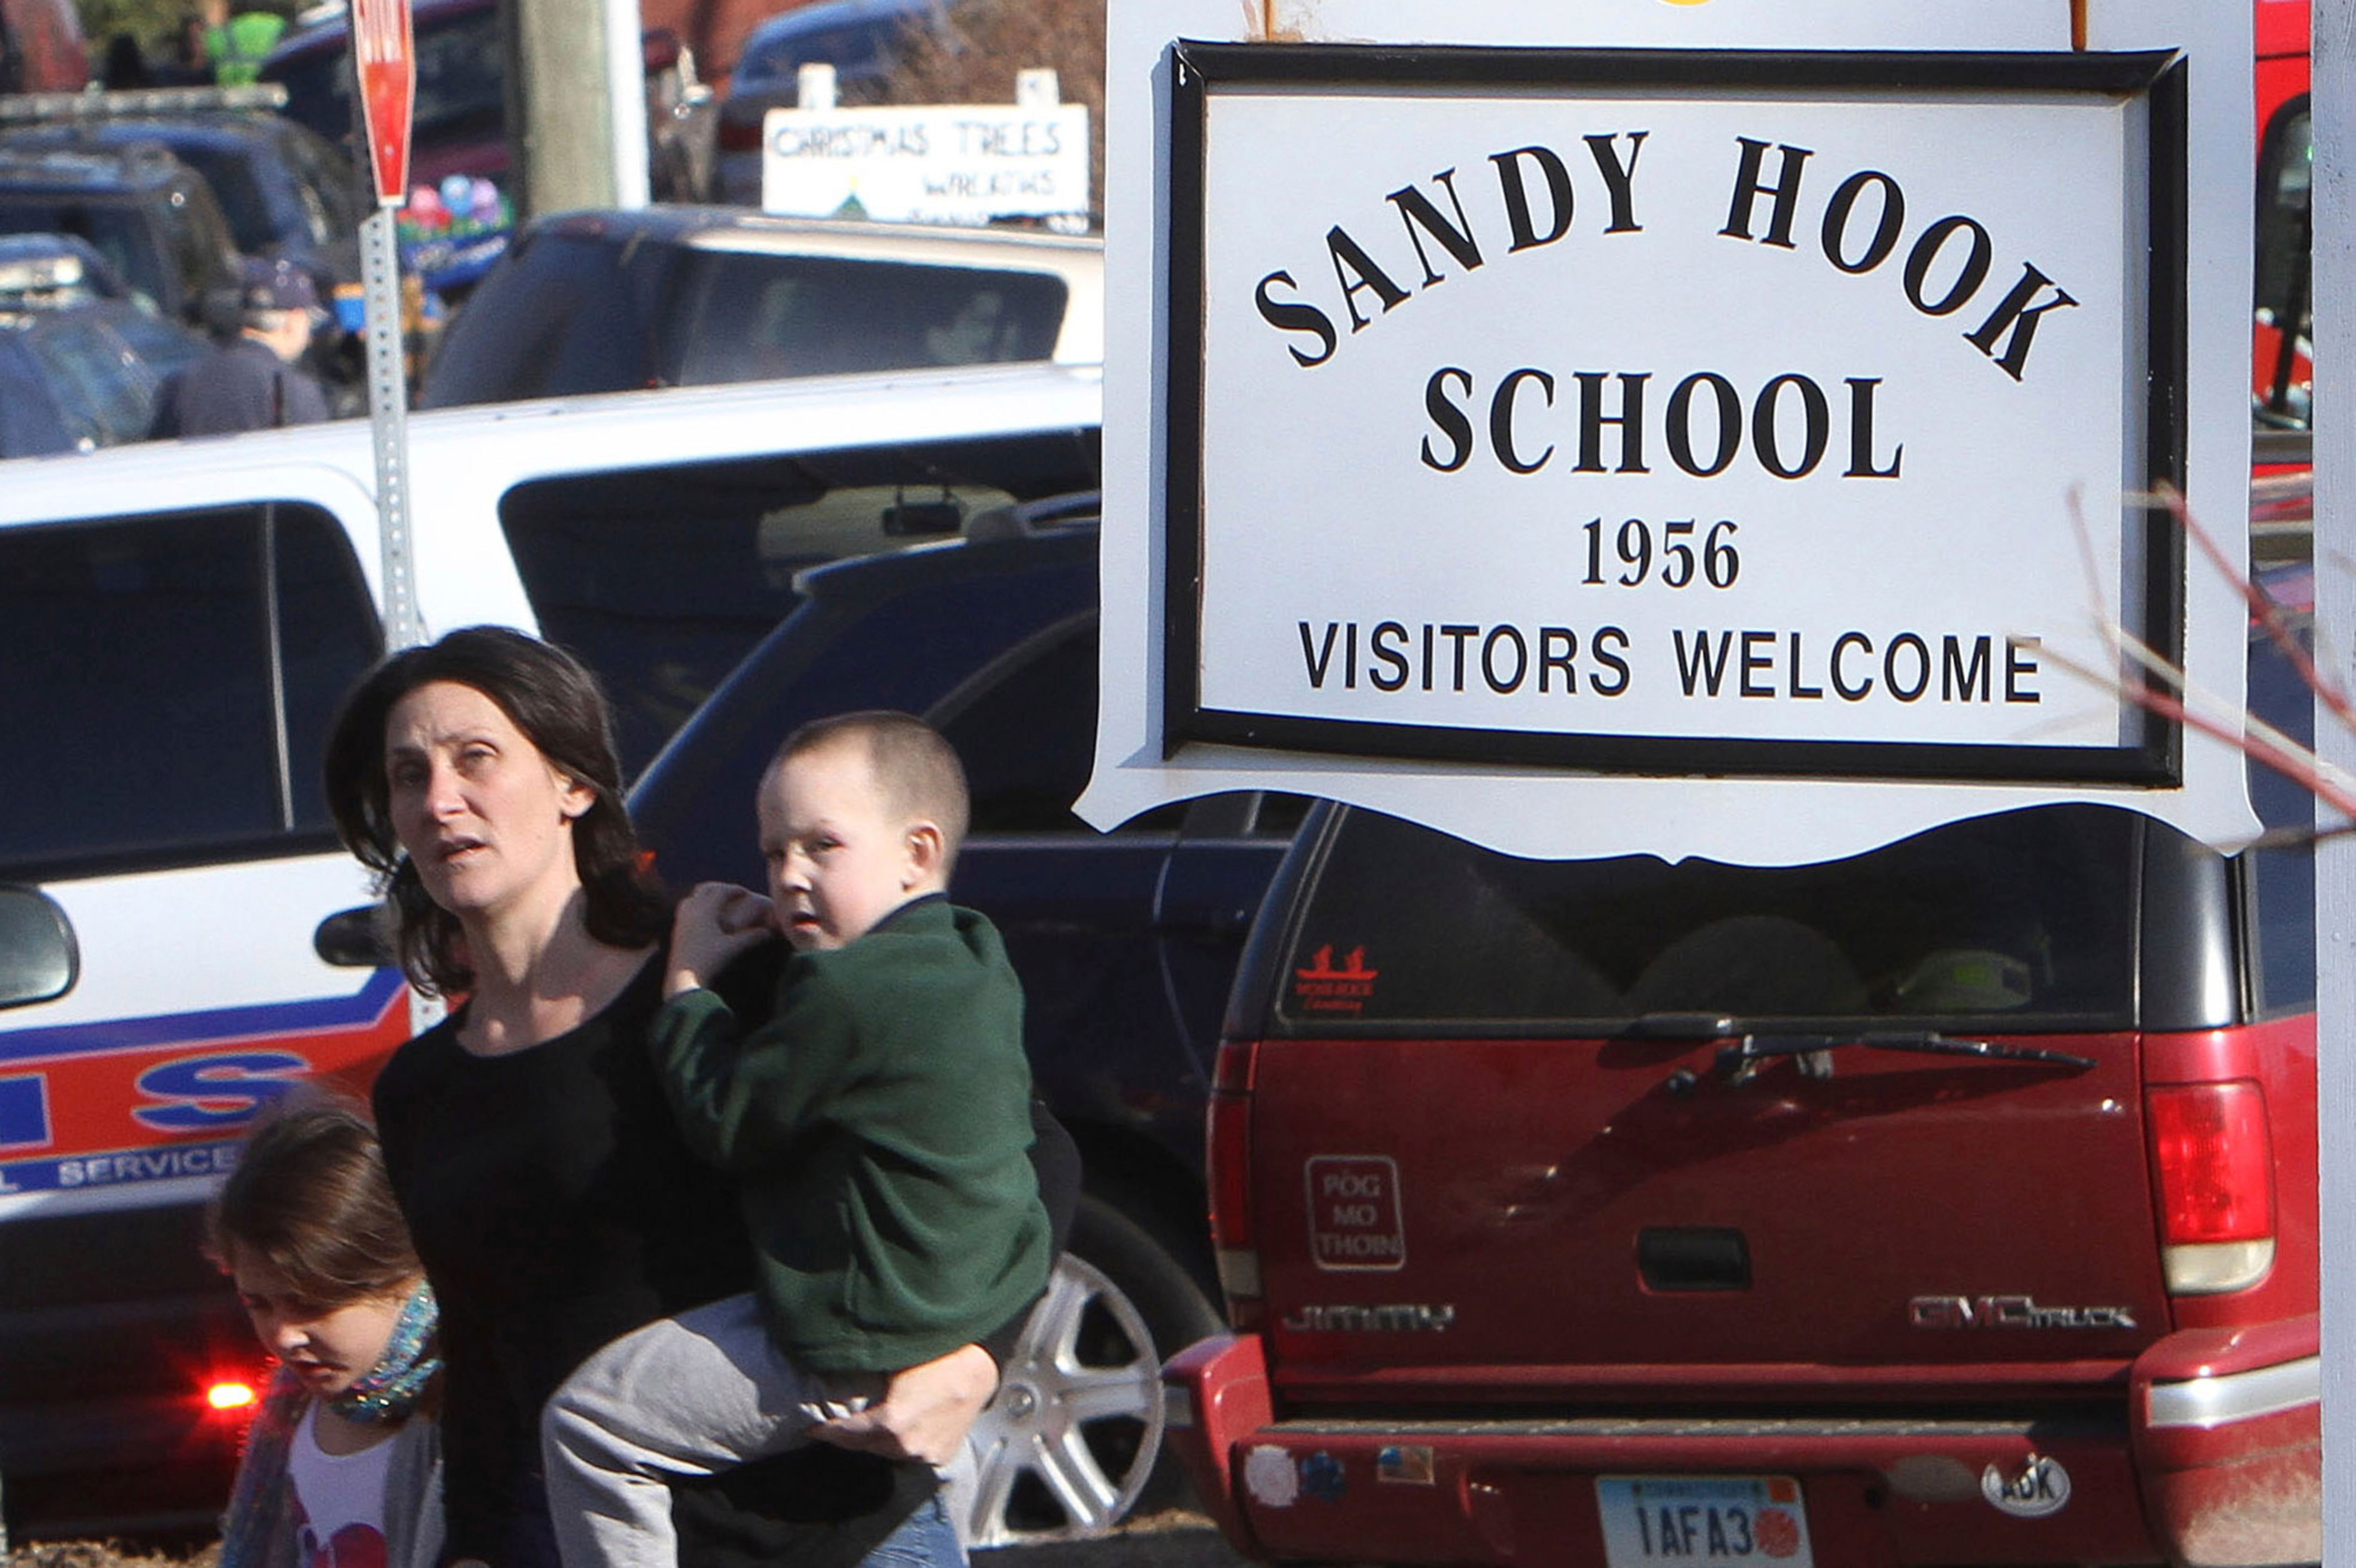 A parent walks away from Sandy Hook Elementary School with her children following the shooting in 2012